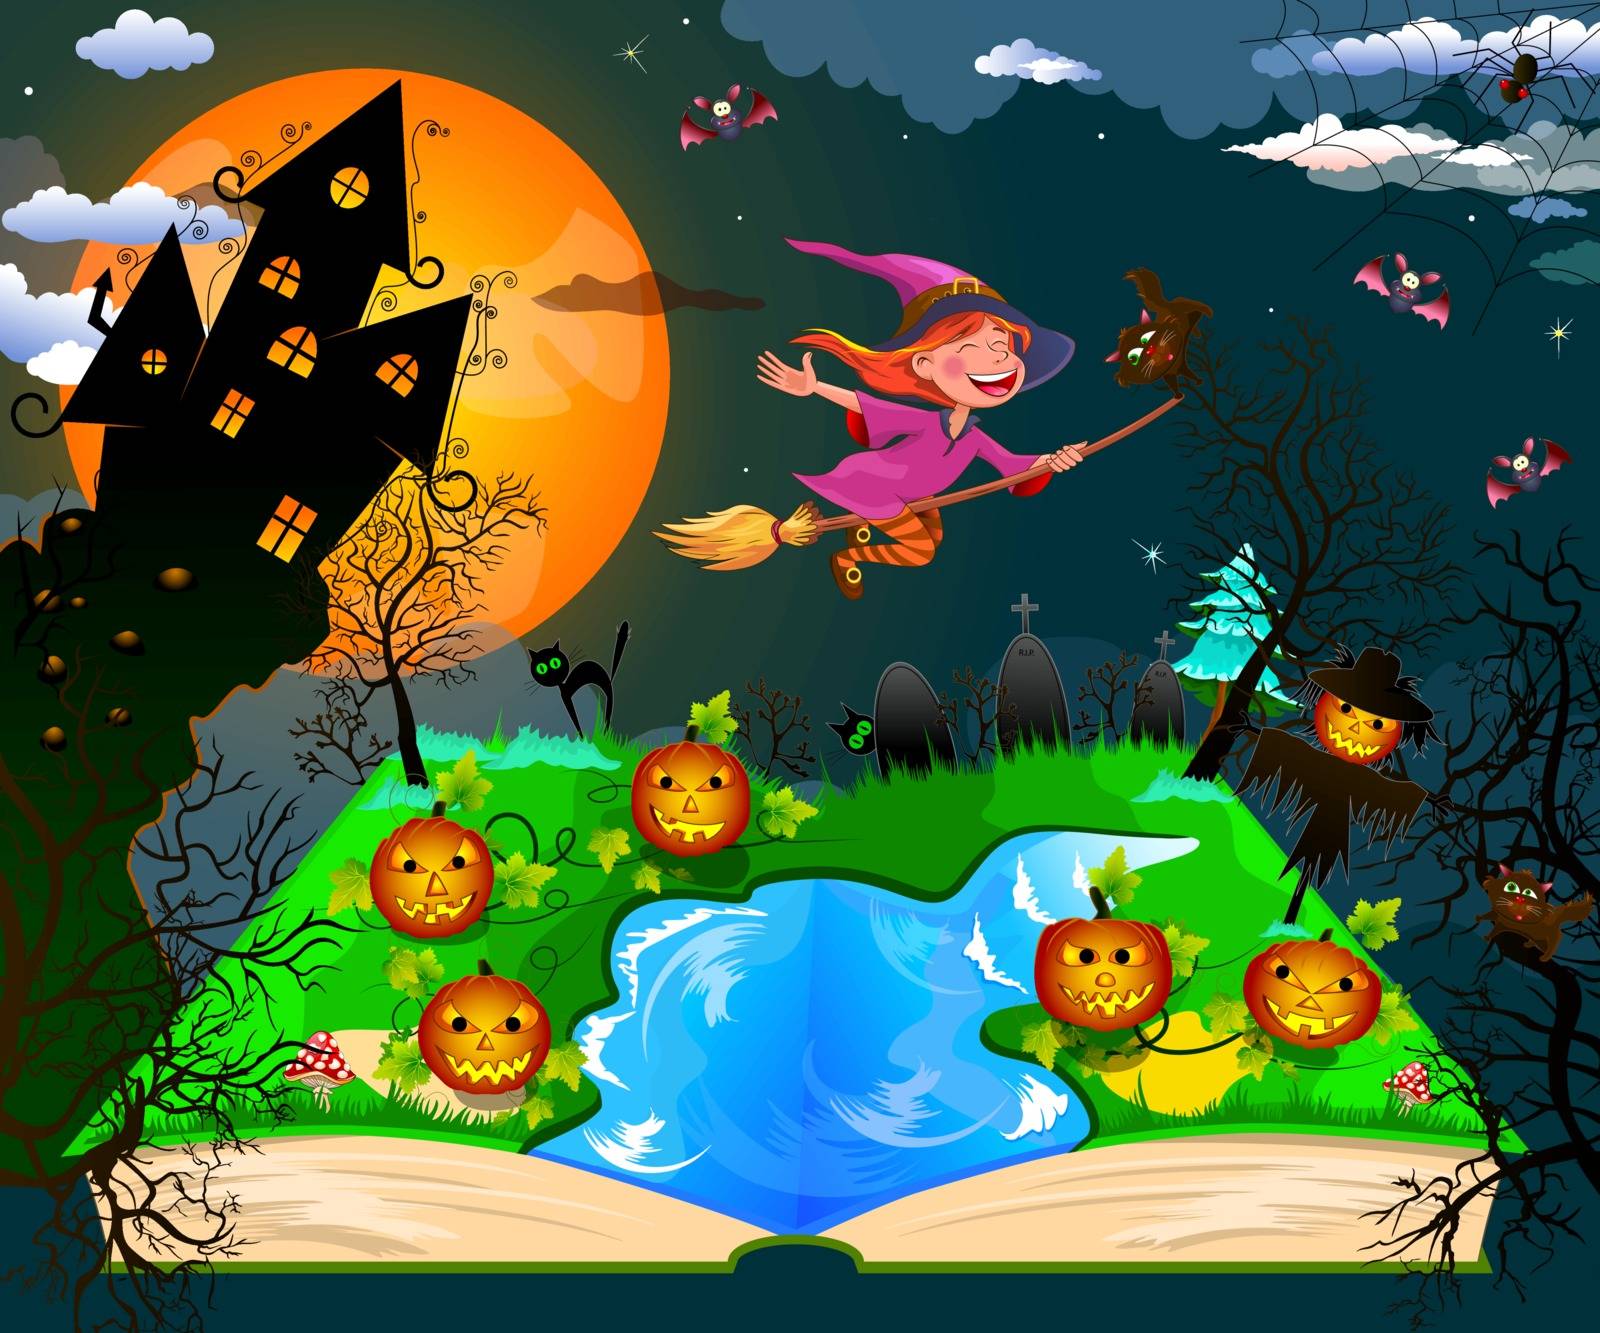 Night on Halloween. Joyful little witch flying on a broomstick in the night sky, against the backdrop of a castle, a pumpkin and trees, surrounded by bats. Witch and cat flying on a broom.